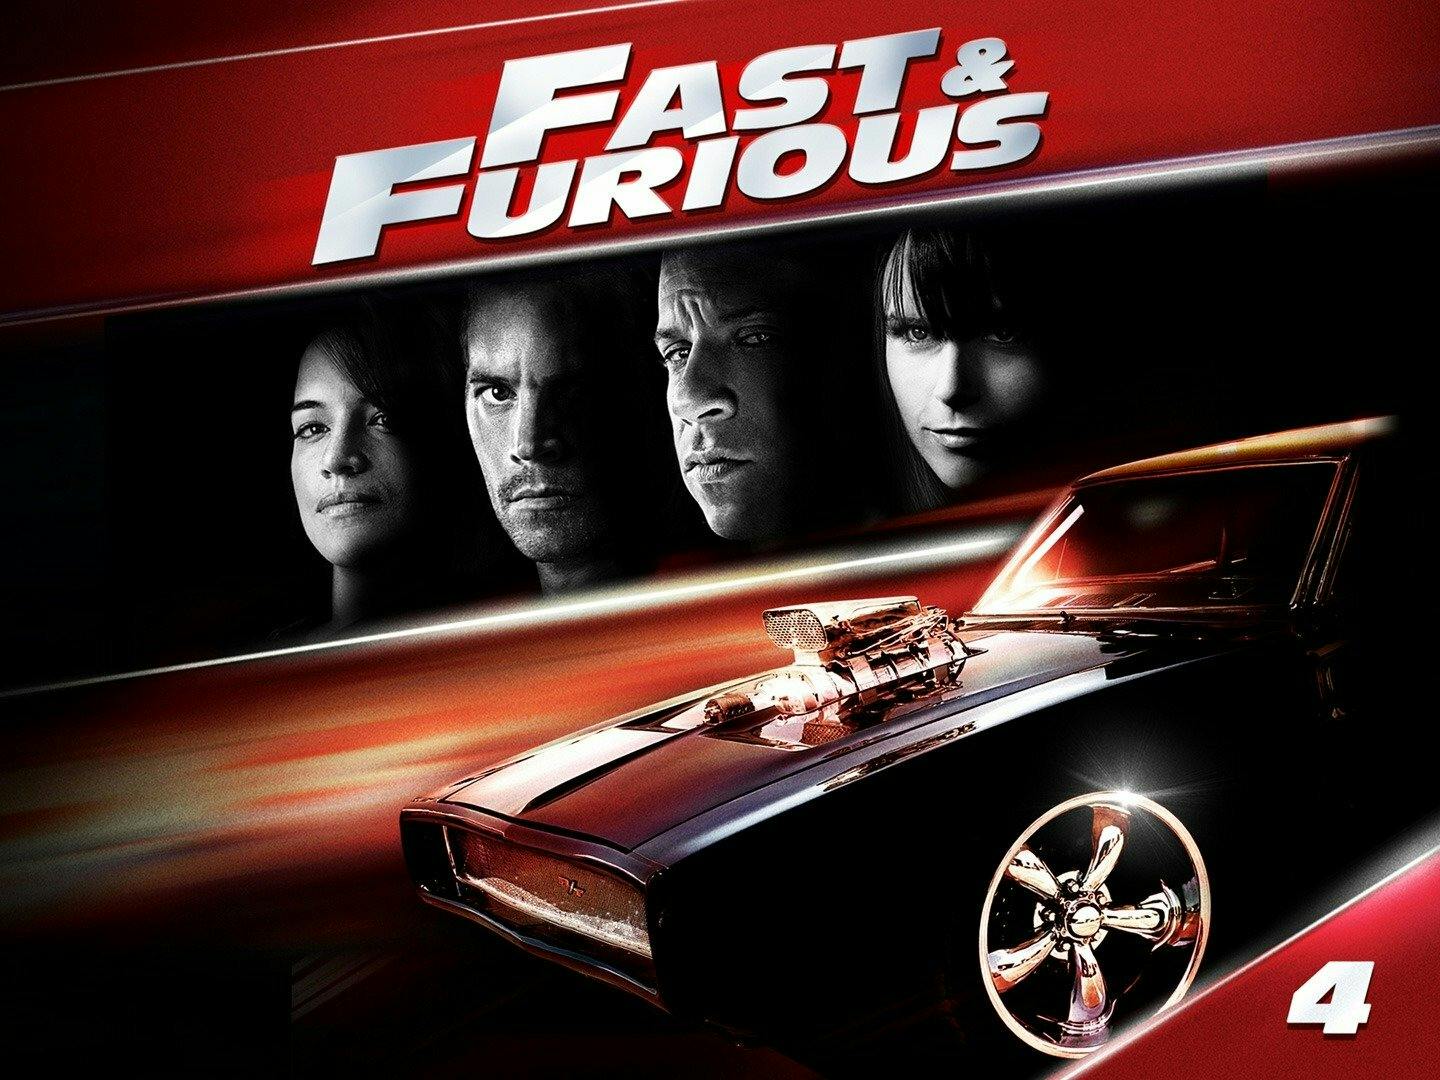 Fast & Furious Image